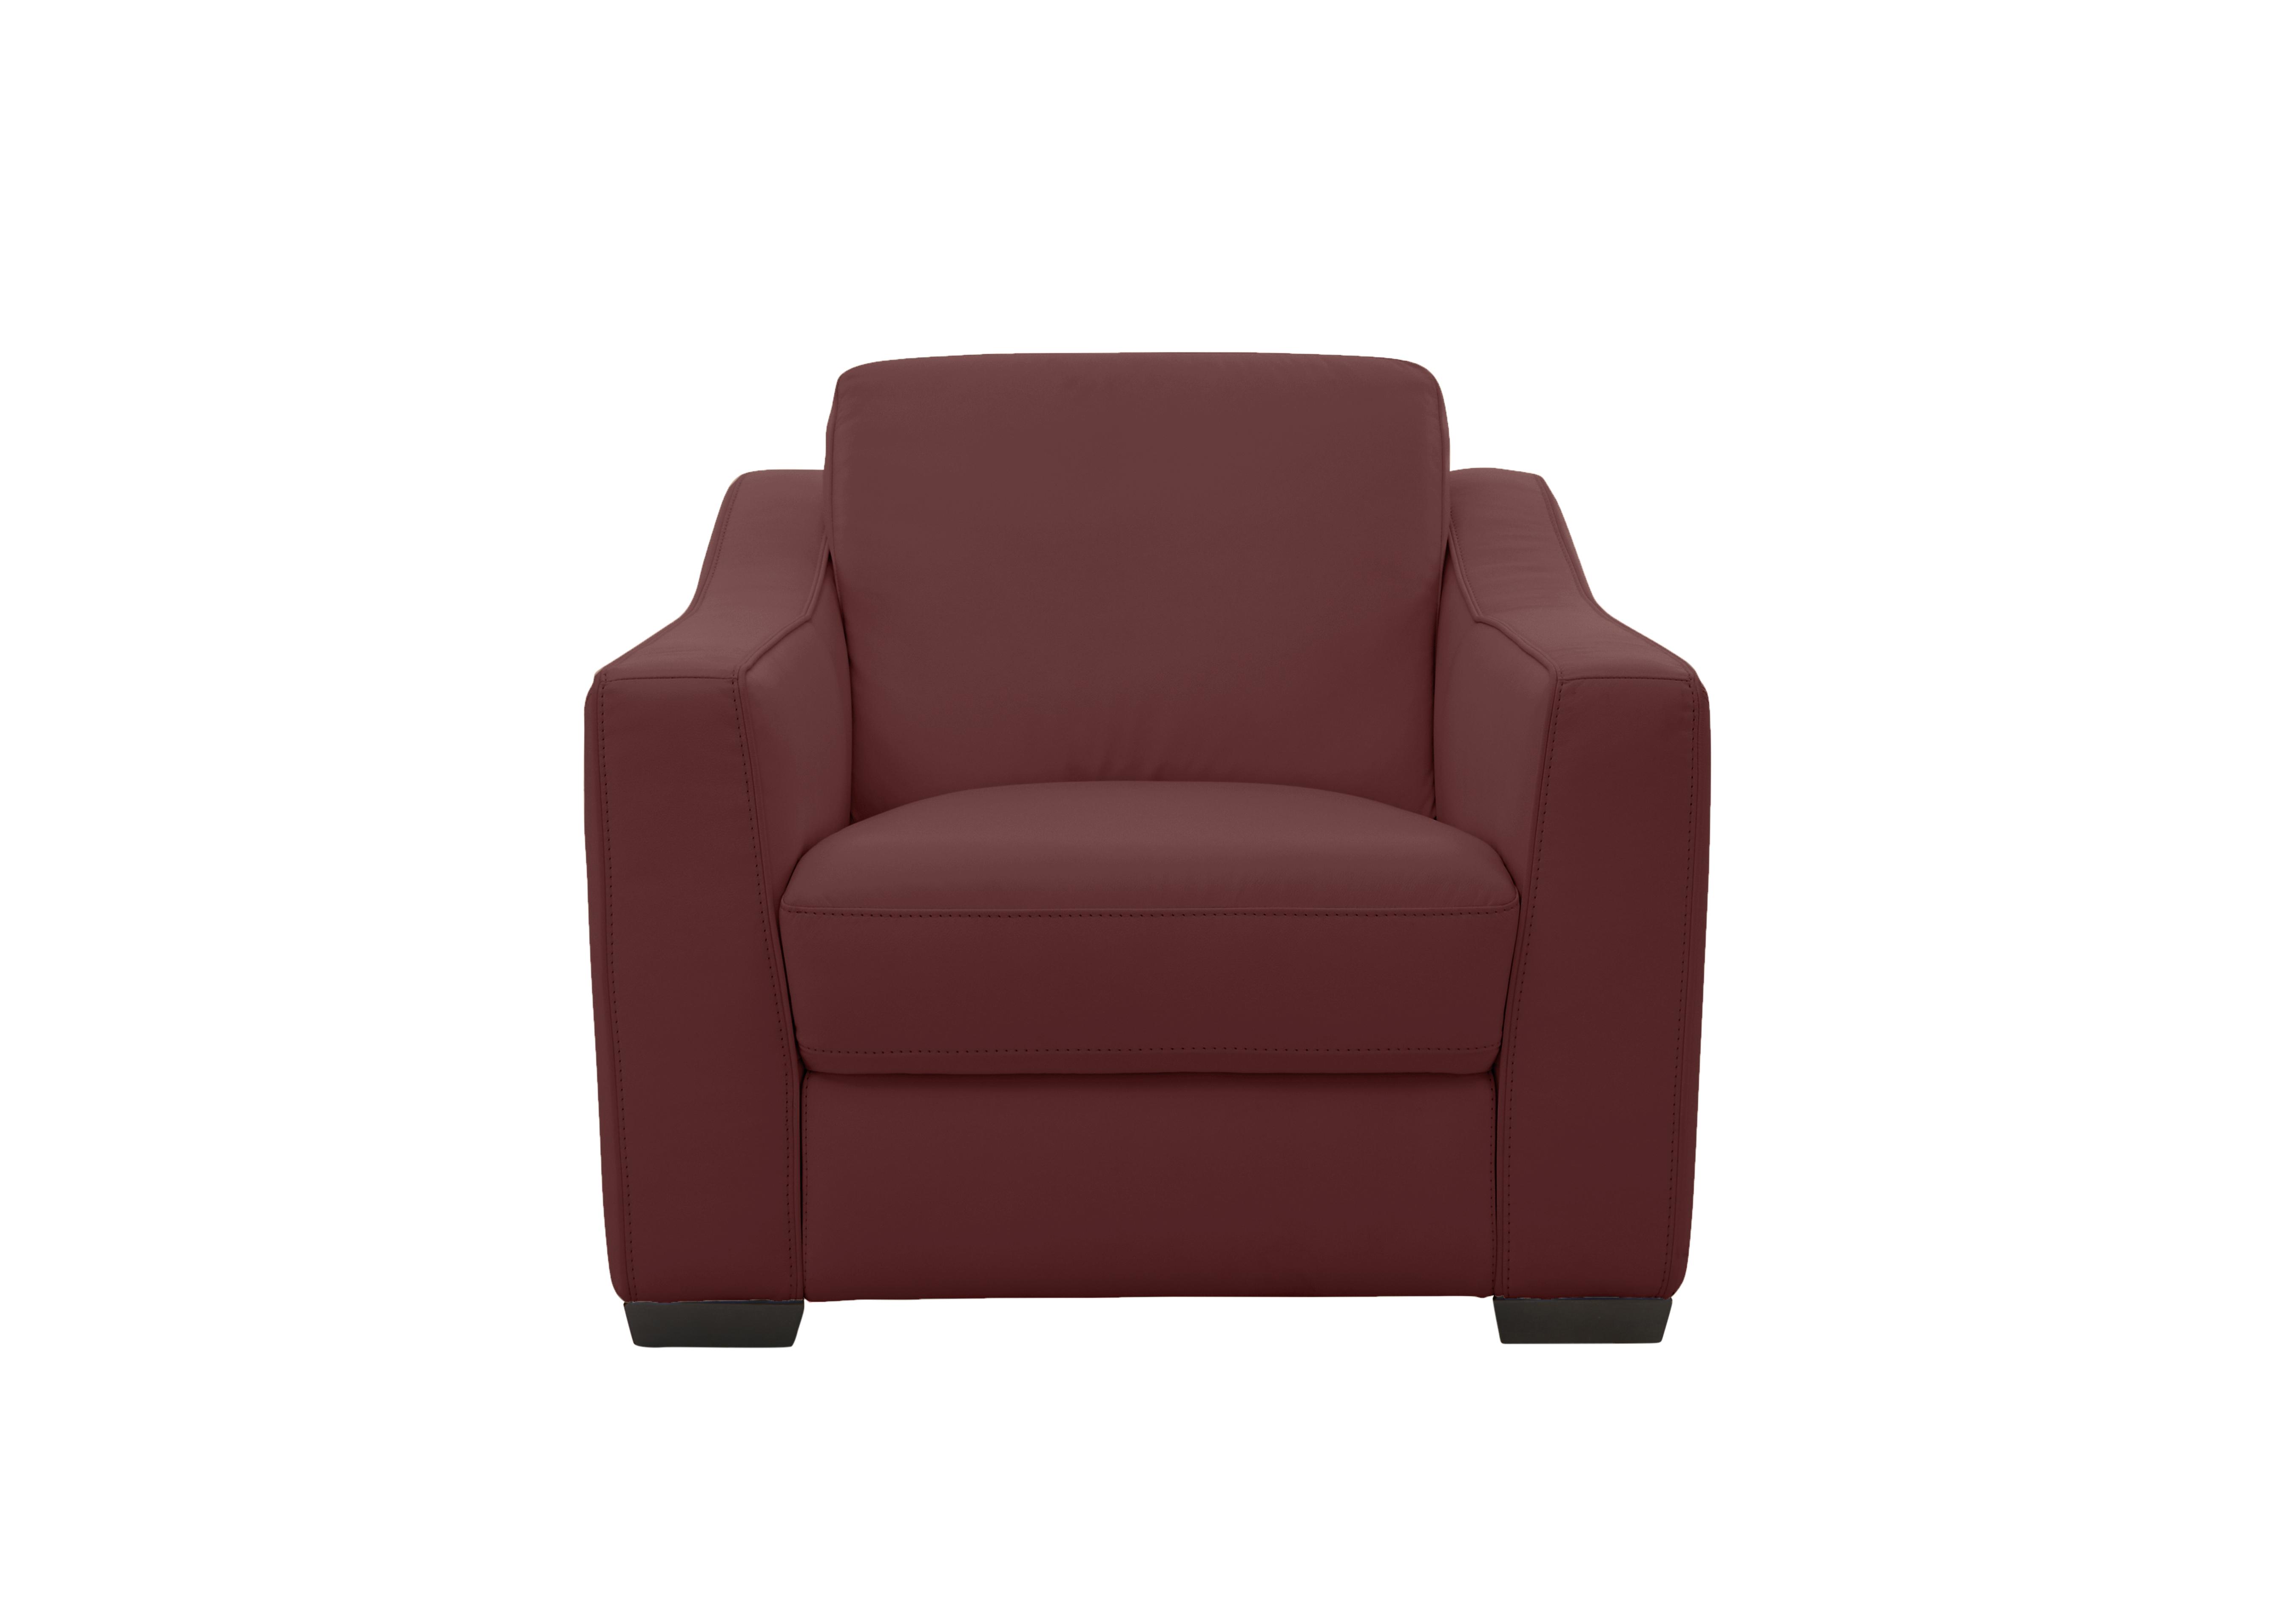 Optimus Leather Armchair in Bv-035c Deep Red on Furniture Village